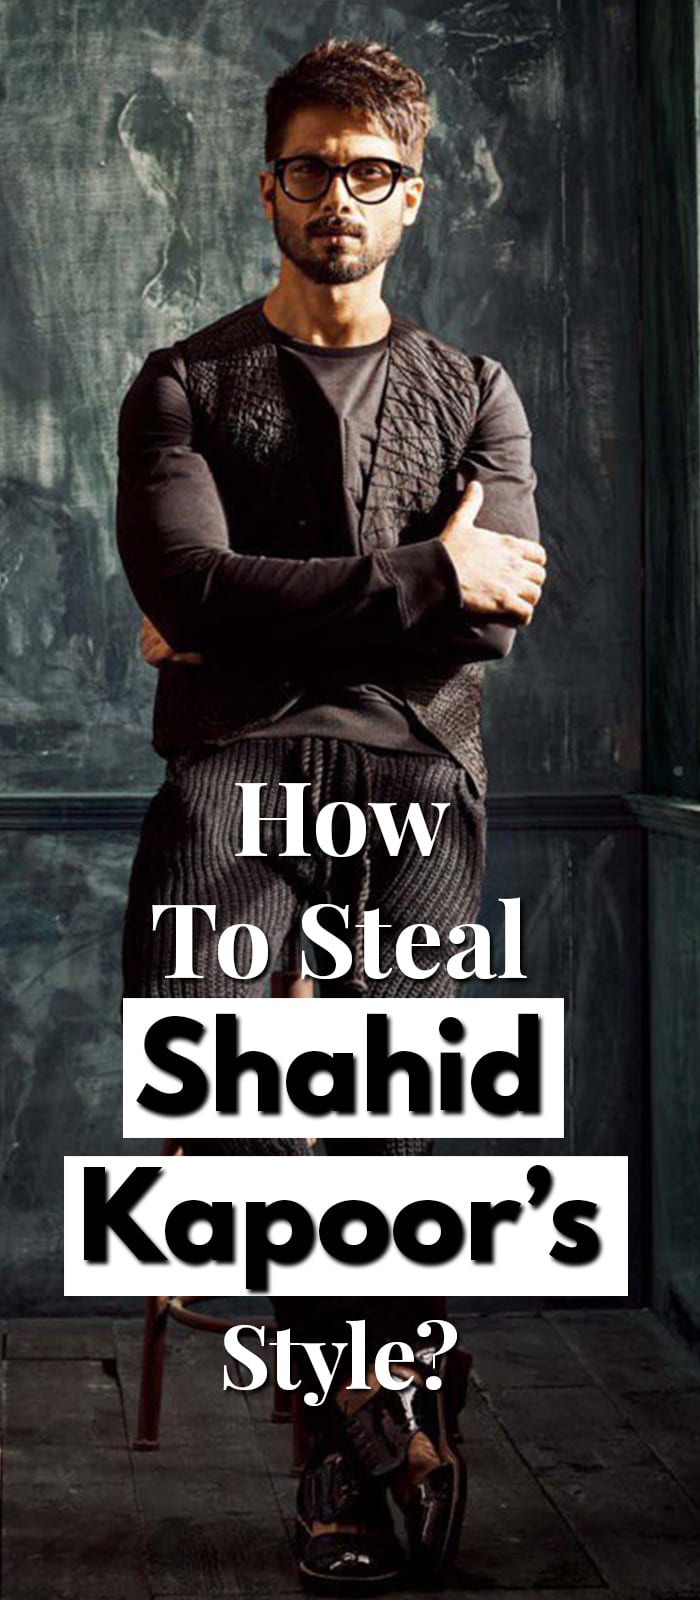 How To Steal Shahid Kapoor’s Style